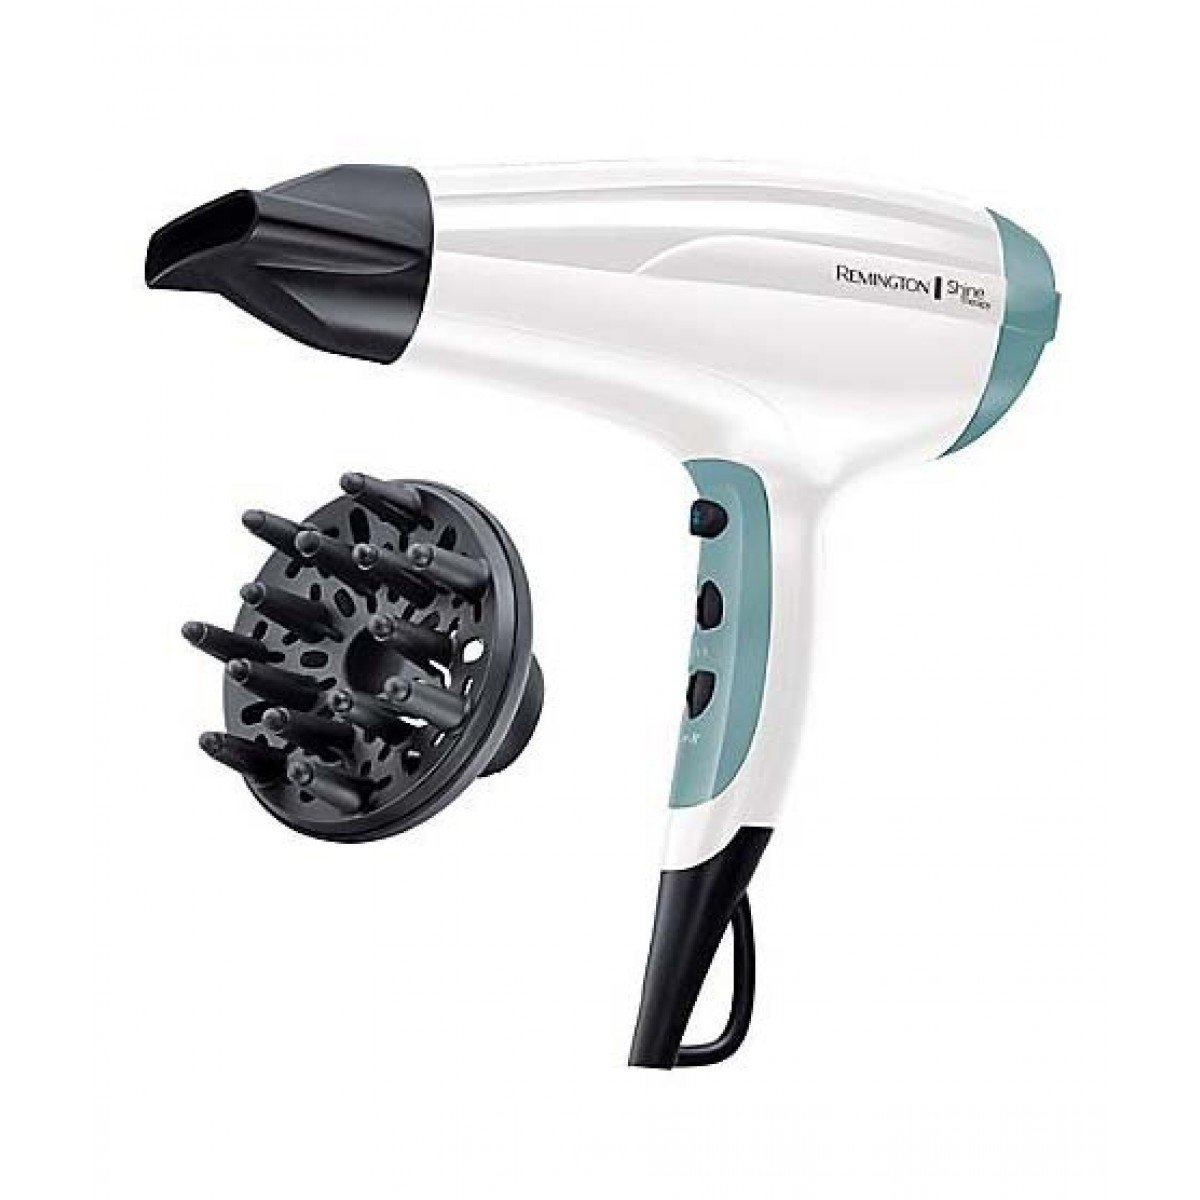 Remington Shine Therapy Hair Dryer with Power Dry and Cool Shot for a Frizz Free Shine, Quick Drying, 2300 W - D5216 - Makeup MSash PakiMSan - Remington